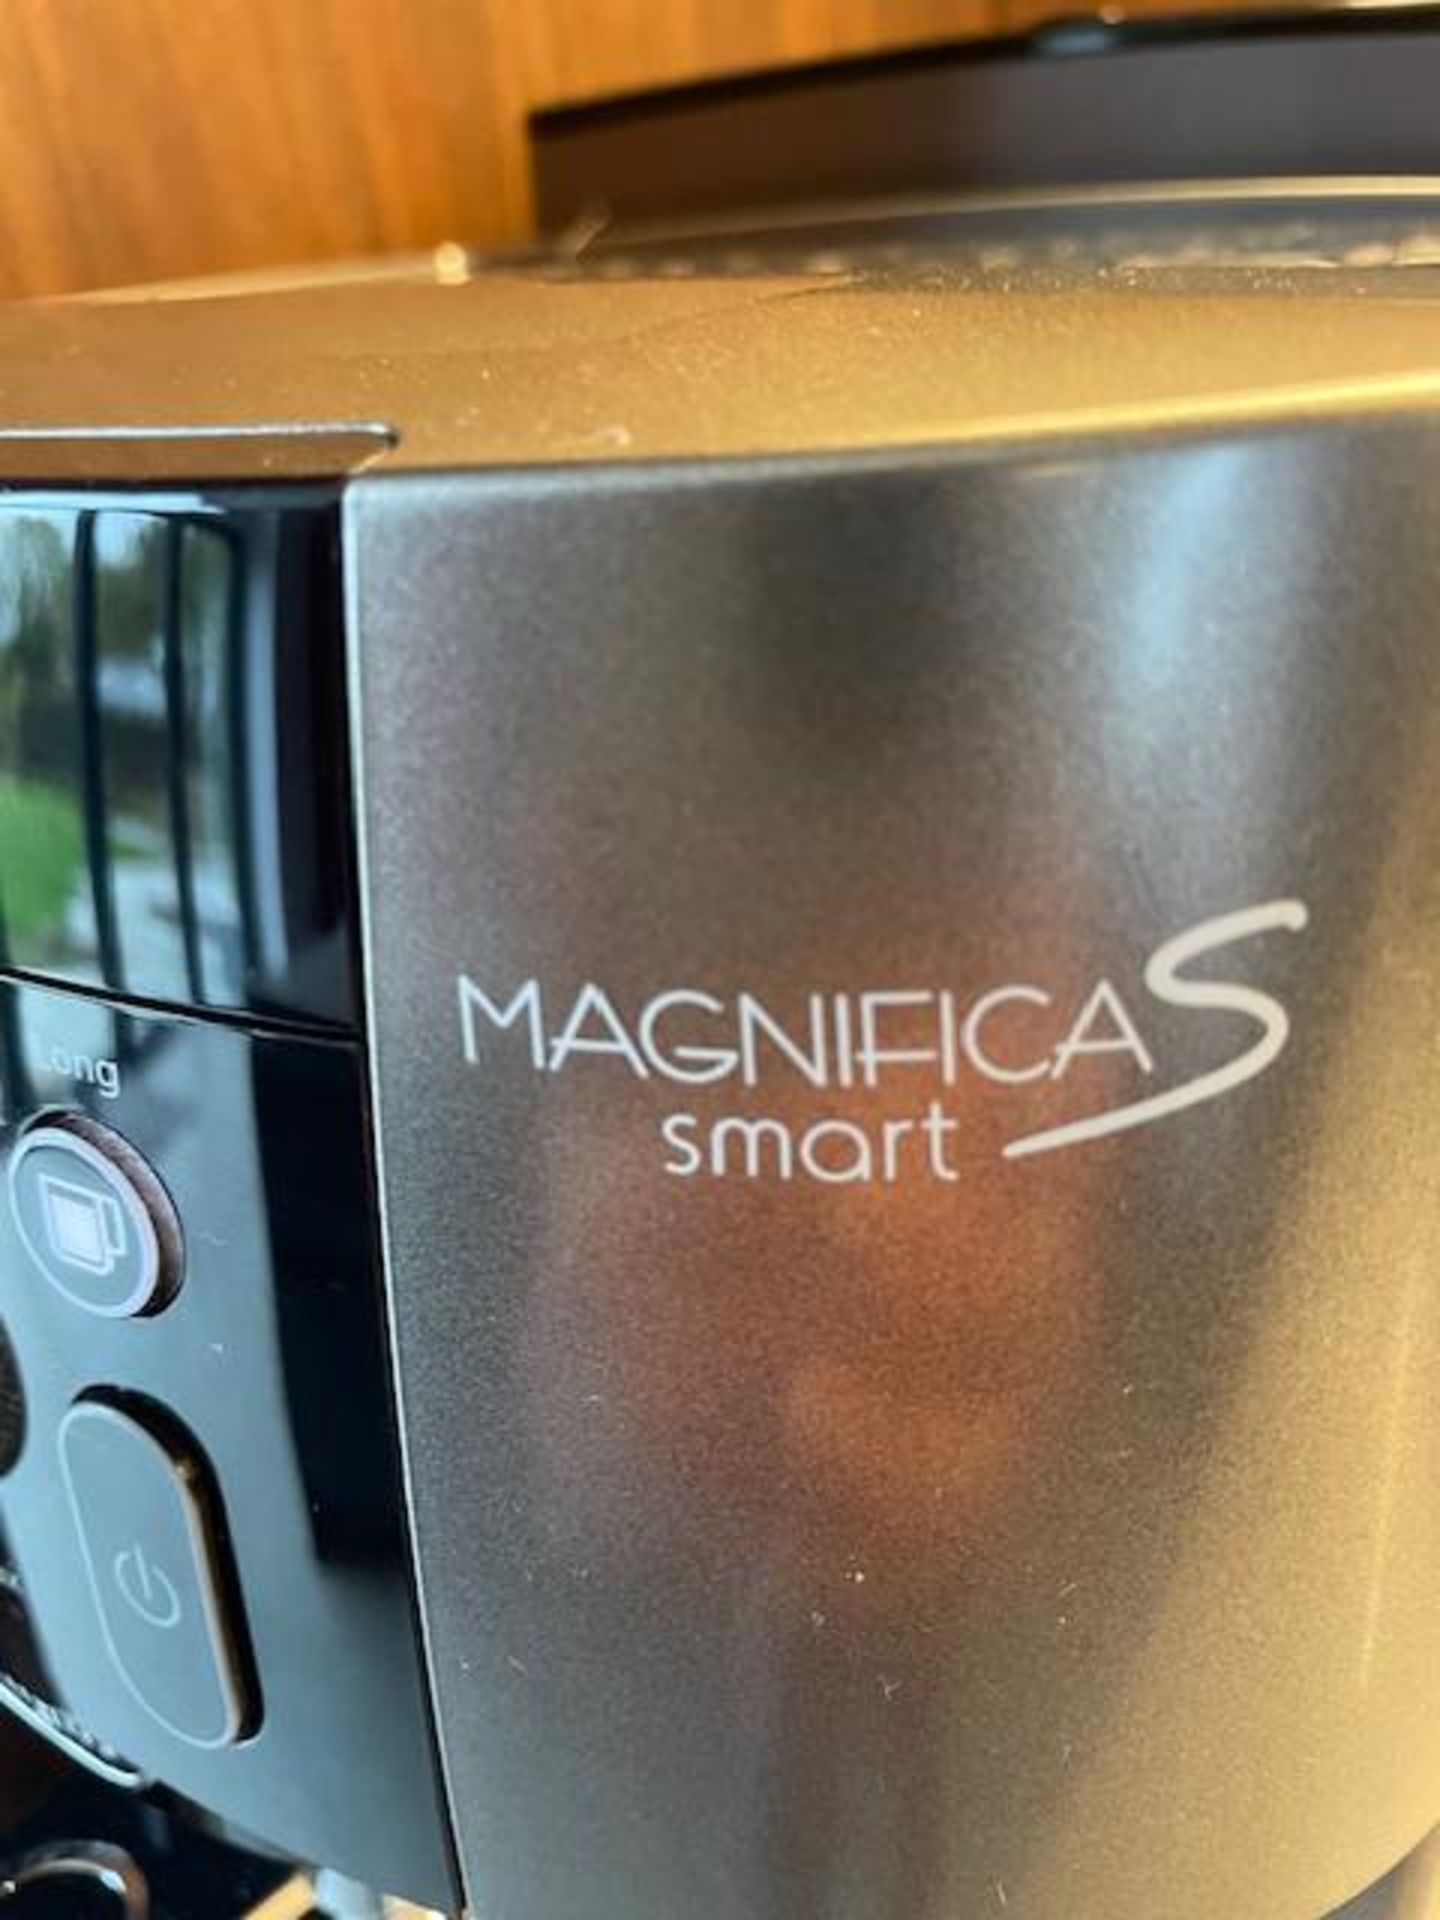 DELONGHI MAGNIFCA S SMART BEAN TO CUP COFFEE MACHINE. - Image 4 of 6